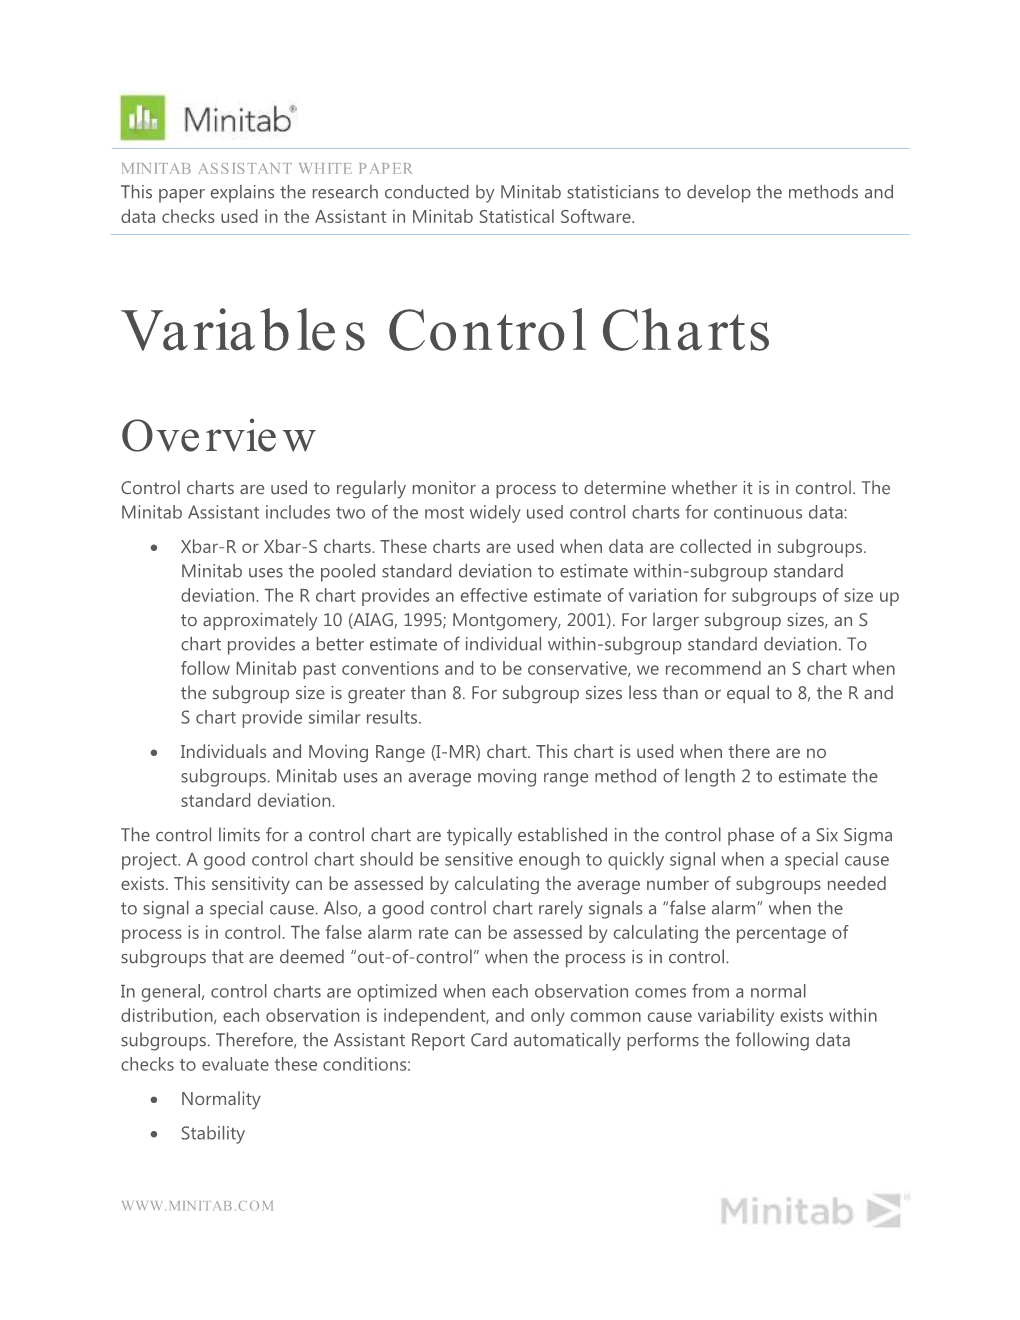 Variables Control Charts in the Assistant